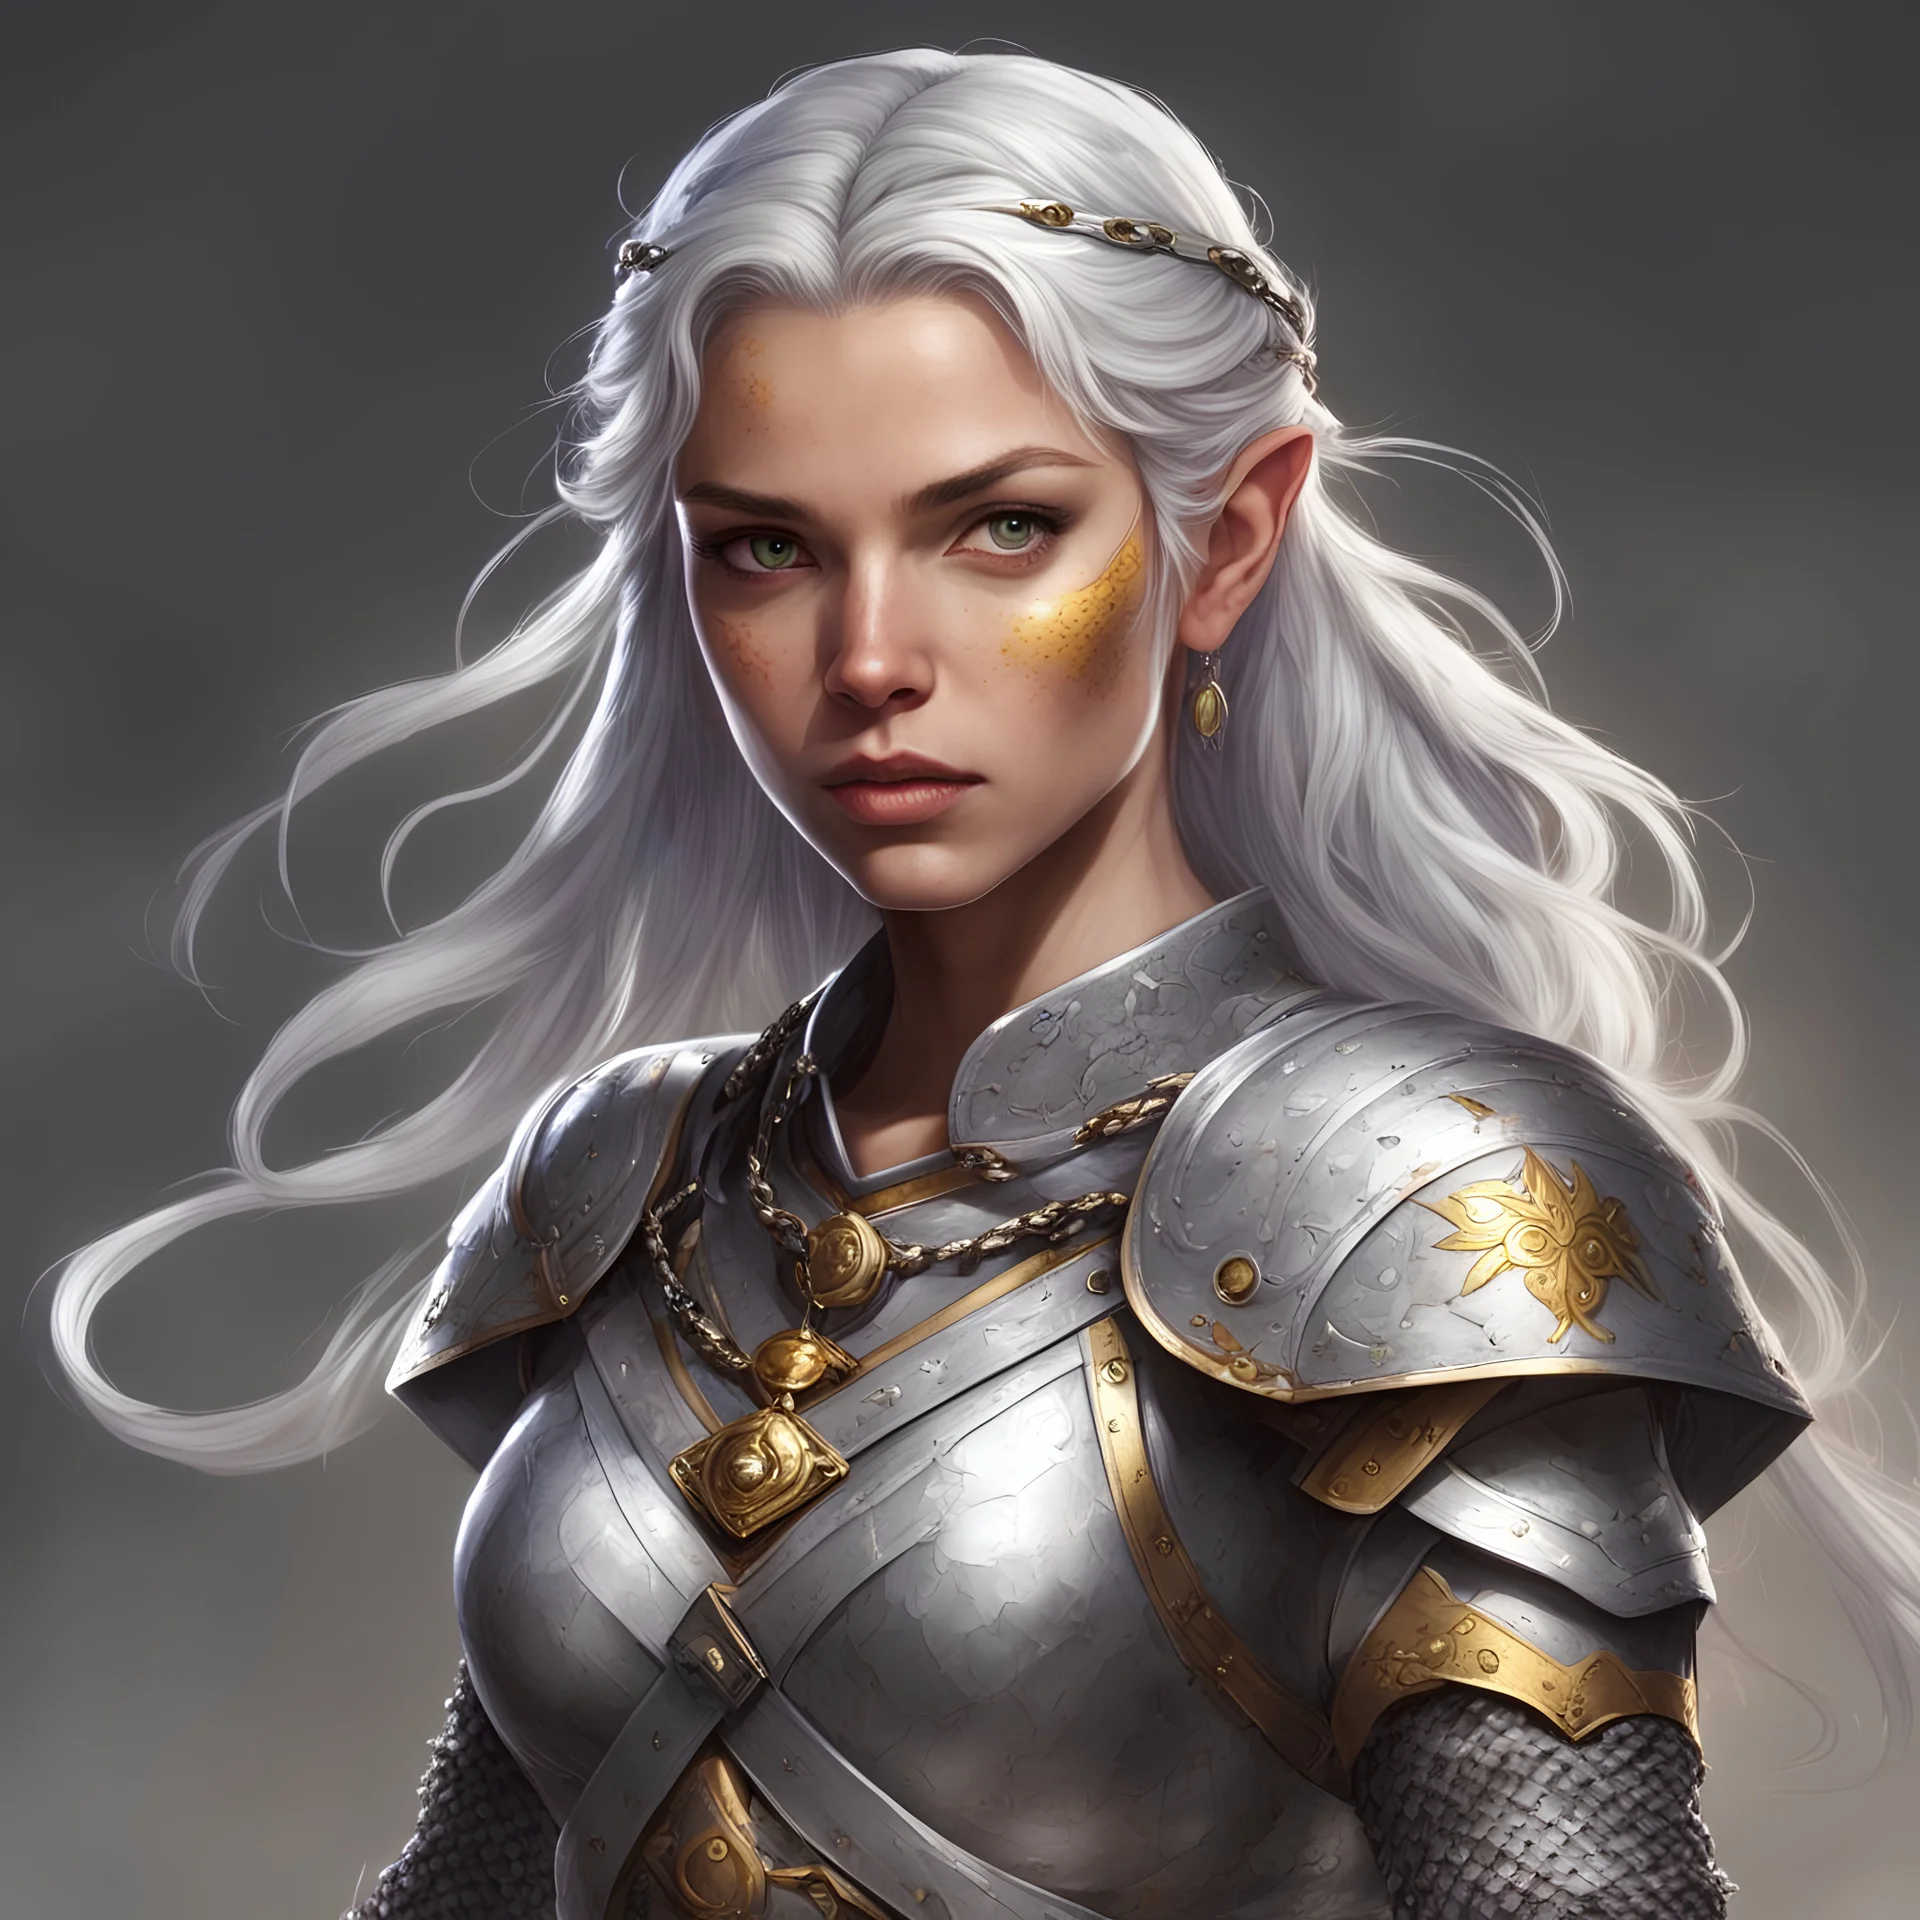 Generate a dungeons and dragons character; a female fighter aasimar . She has silver hair in a braid and golden eyes with freckles . she is wearing chain mail and has a long sword, show fully body